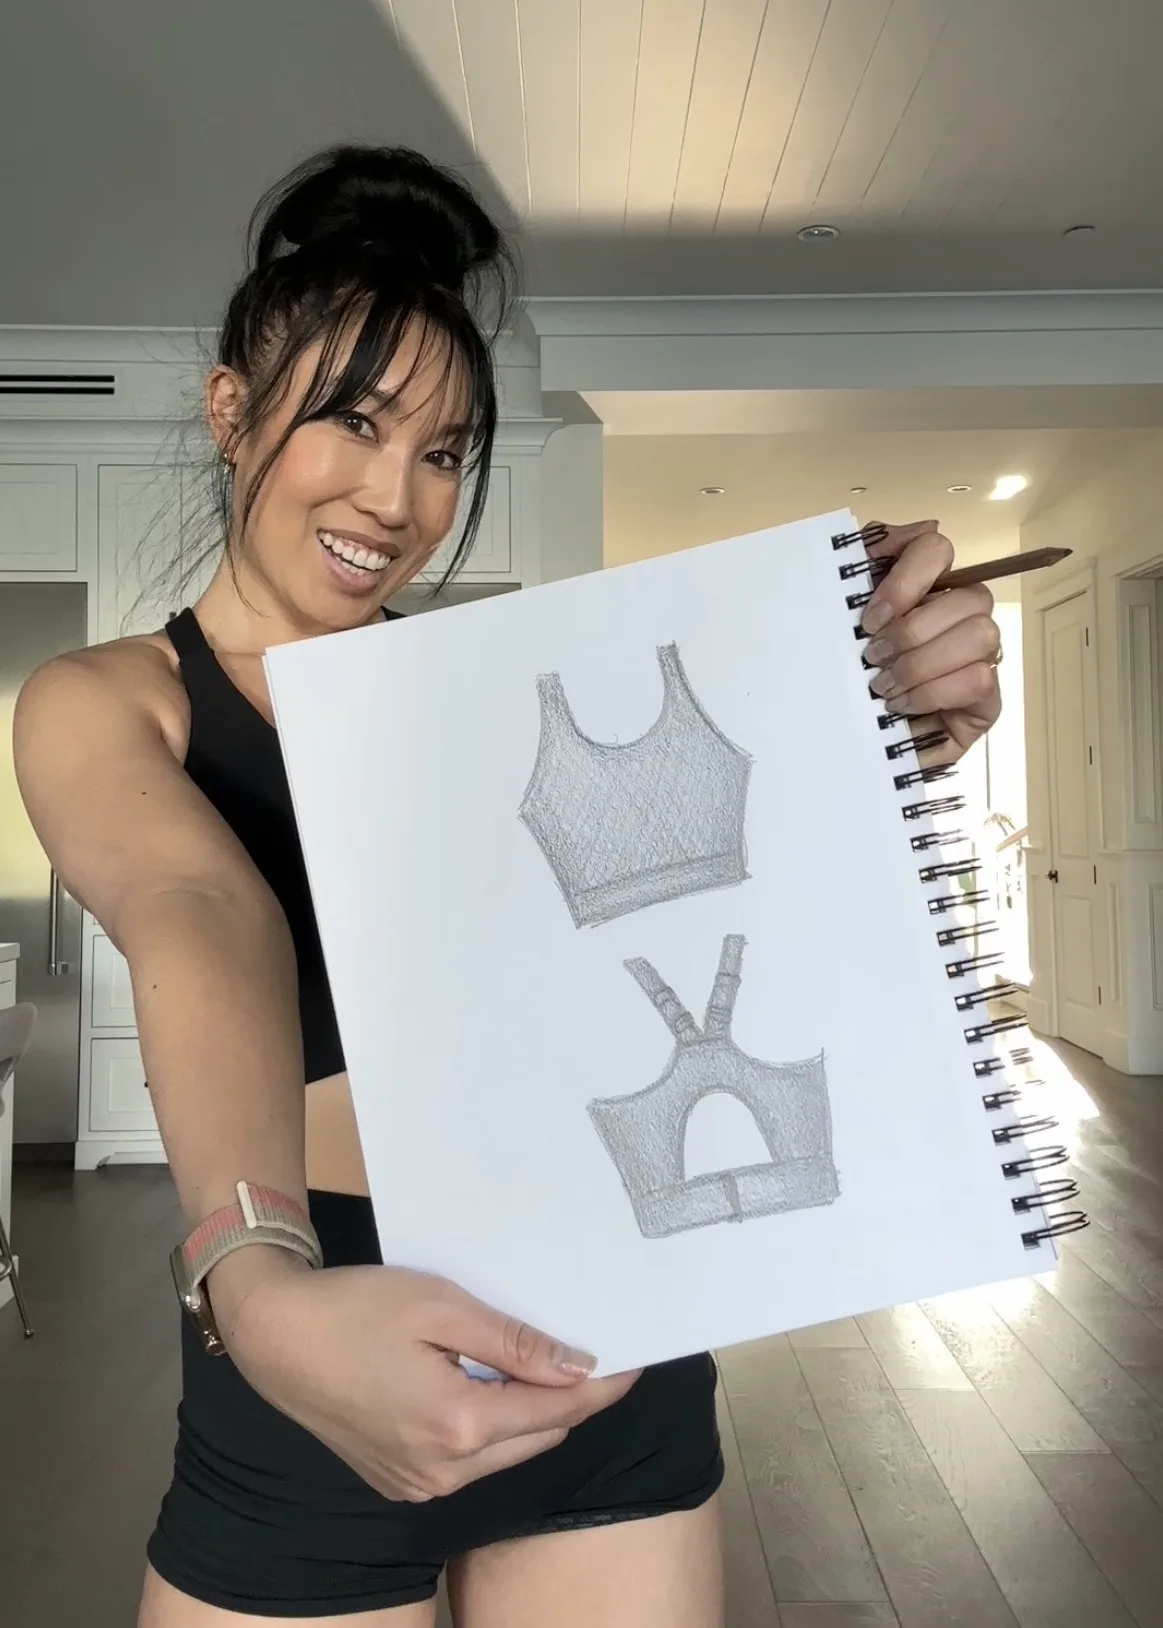 sports bra for big boobs Archives - Blogilates